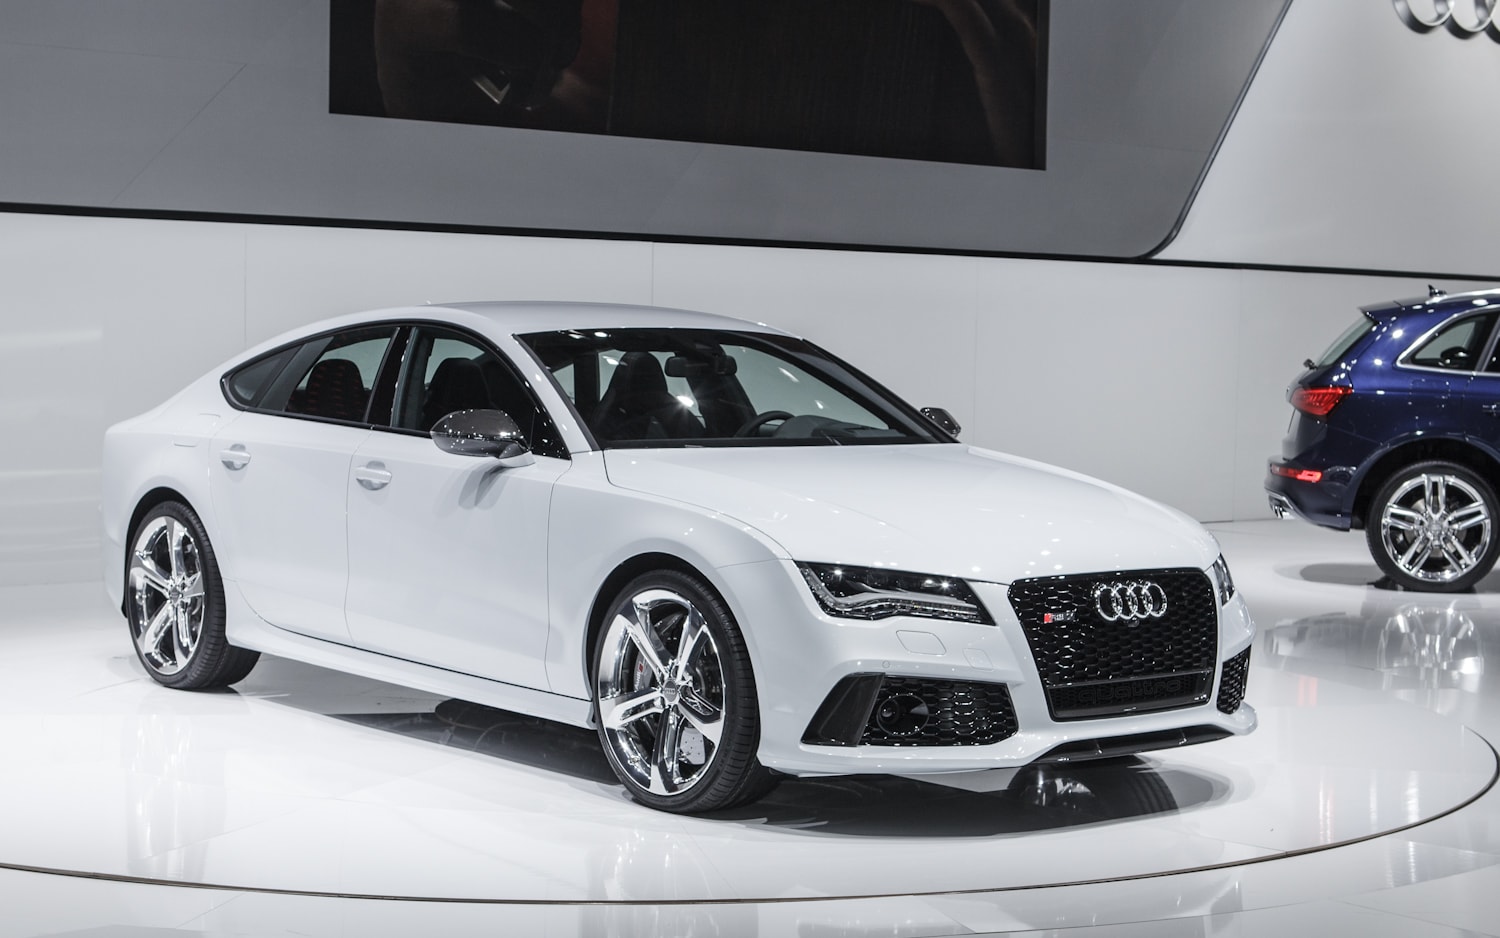 2014 Audi RS 7 Sportback First Look